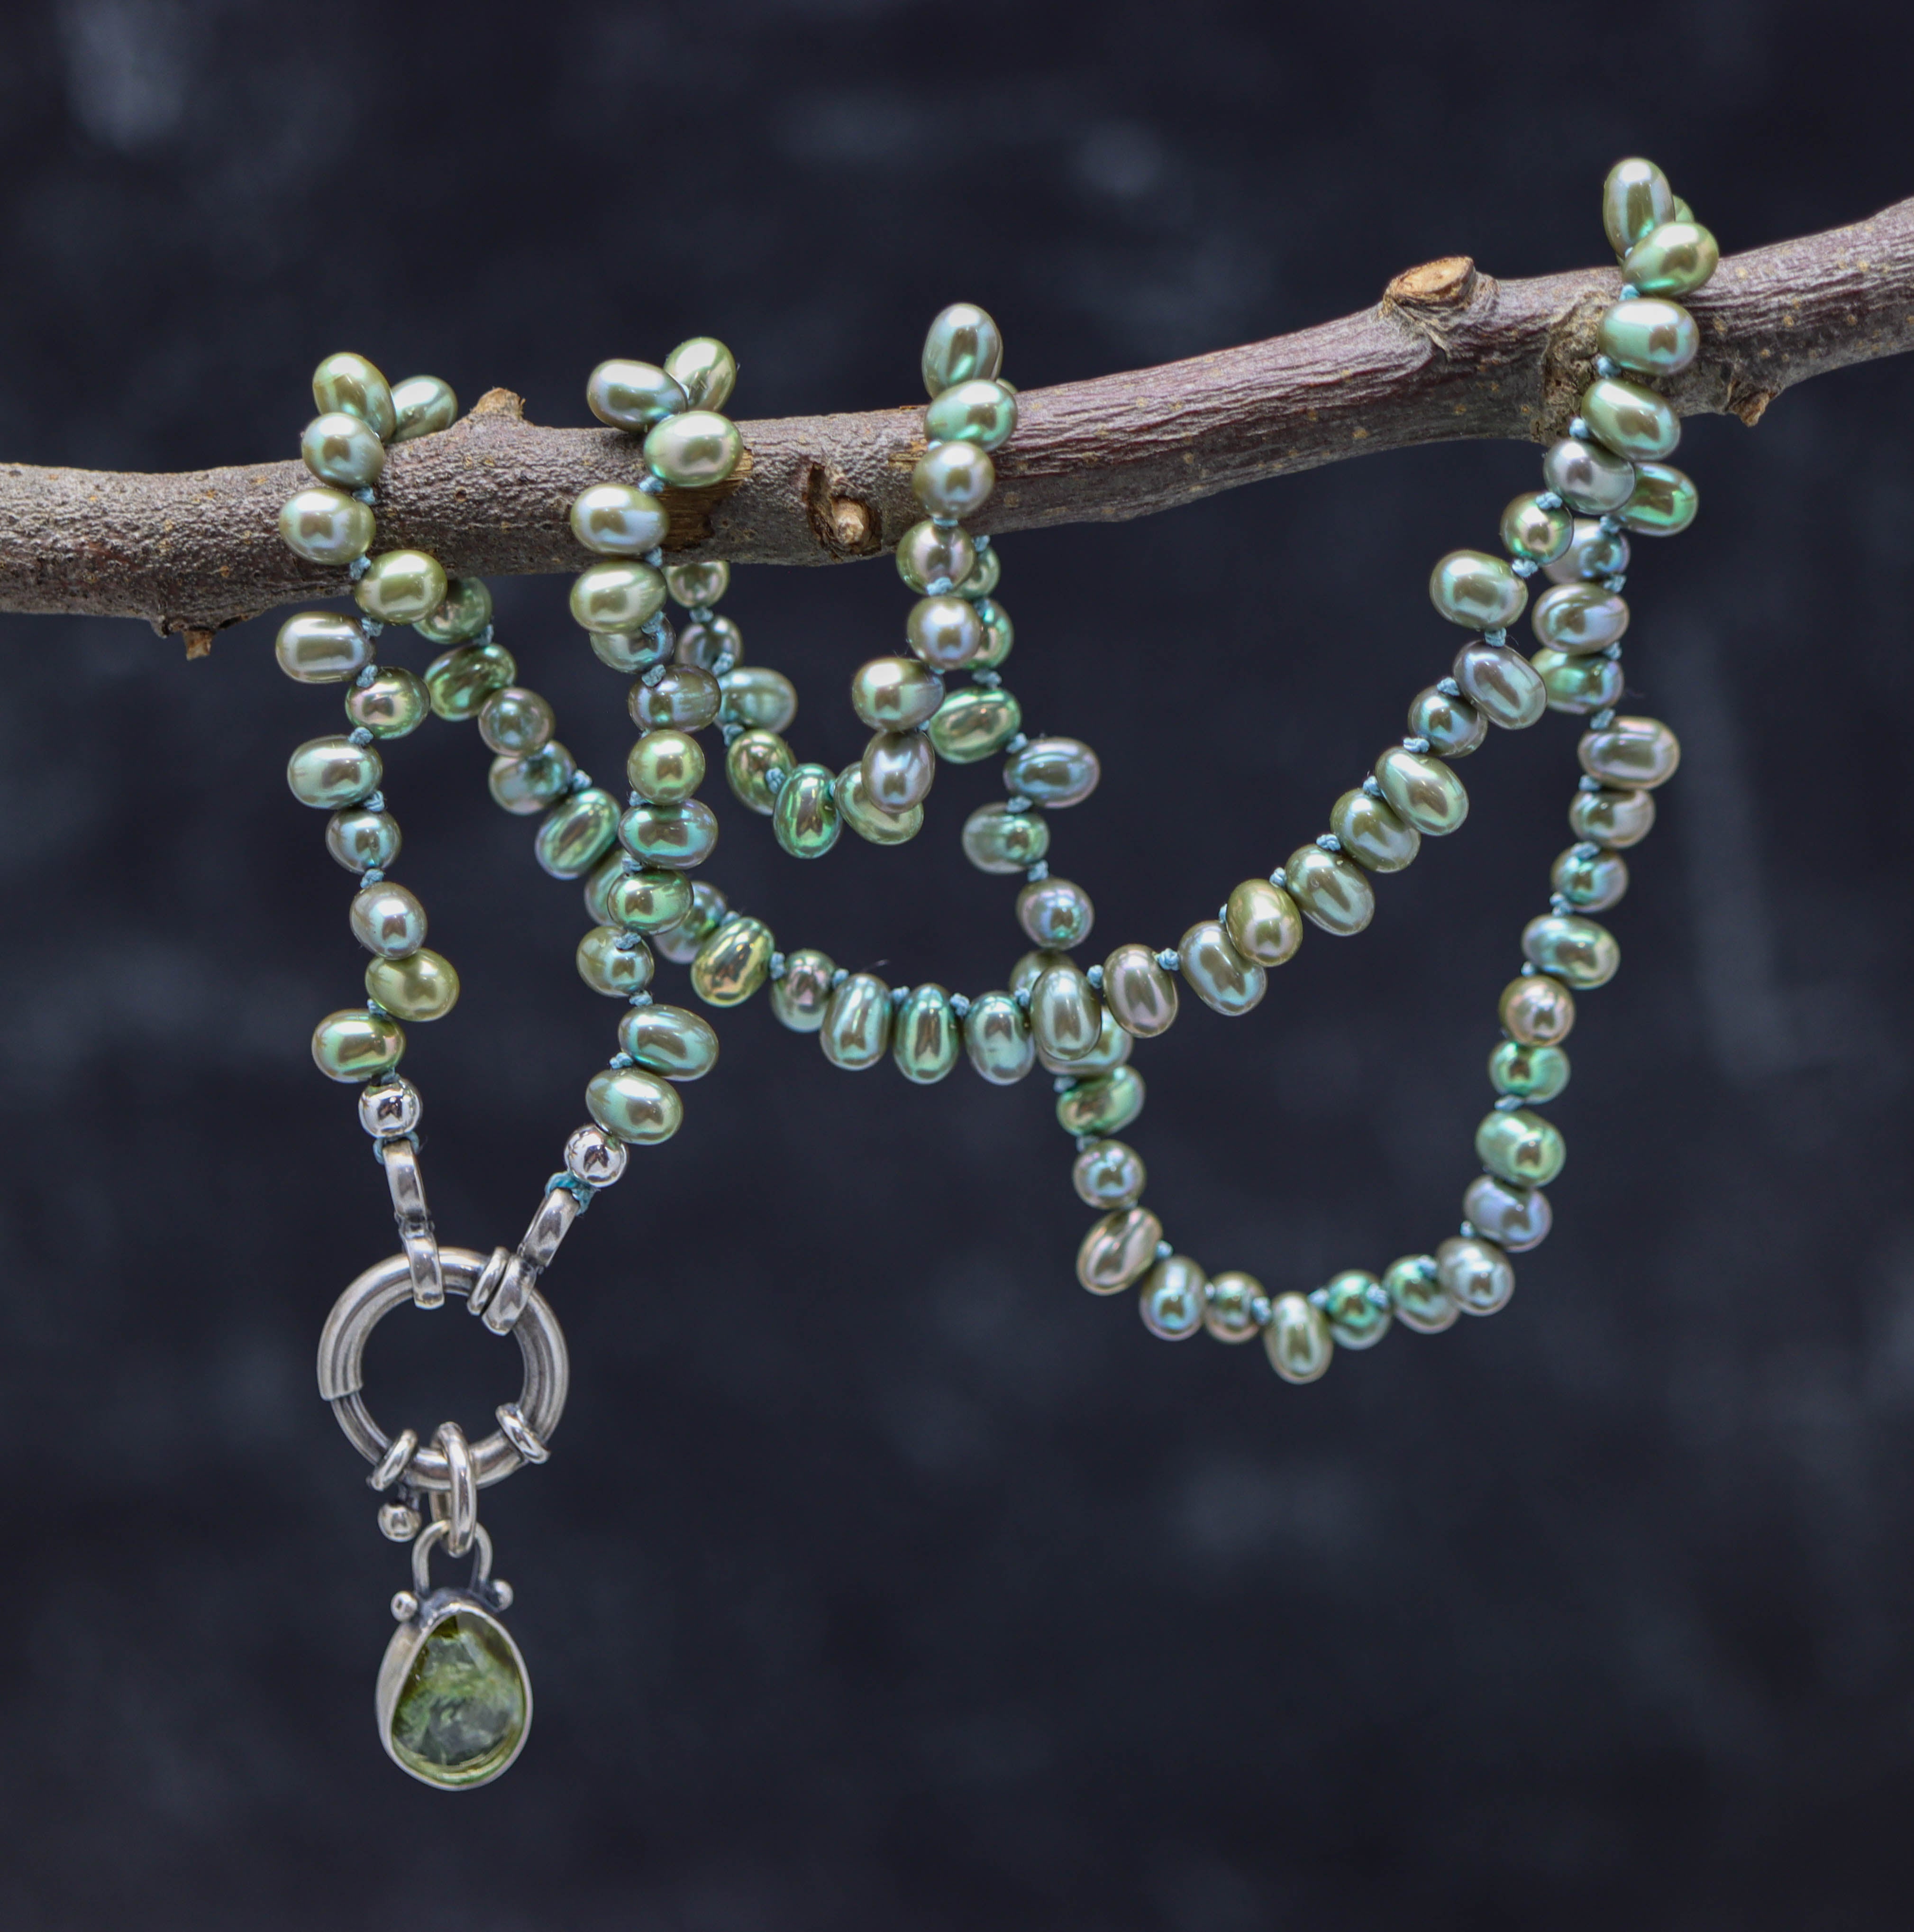 Green Freshwater Pearl and Tourmaline Pendant Hand Knotted Bead Necklace Sterling Silver